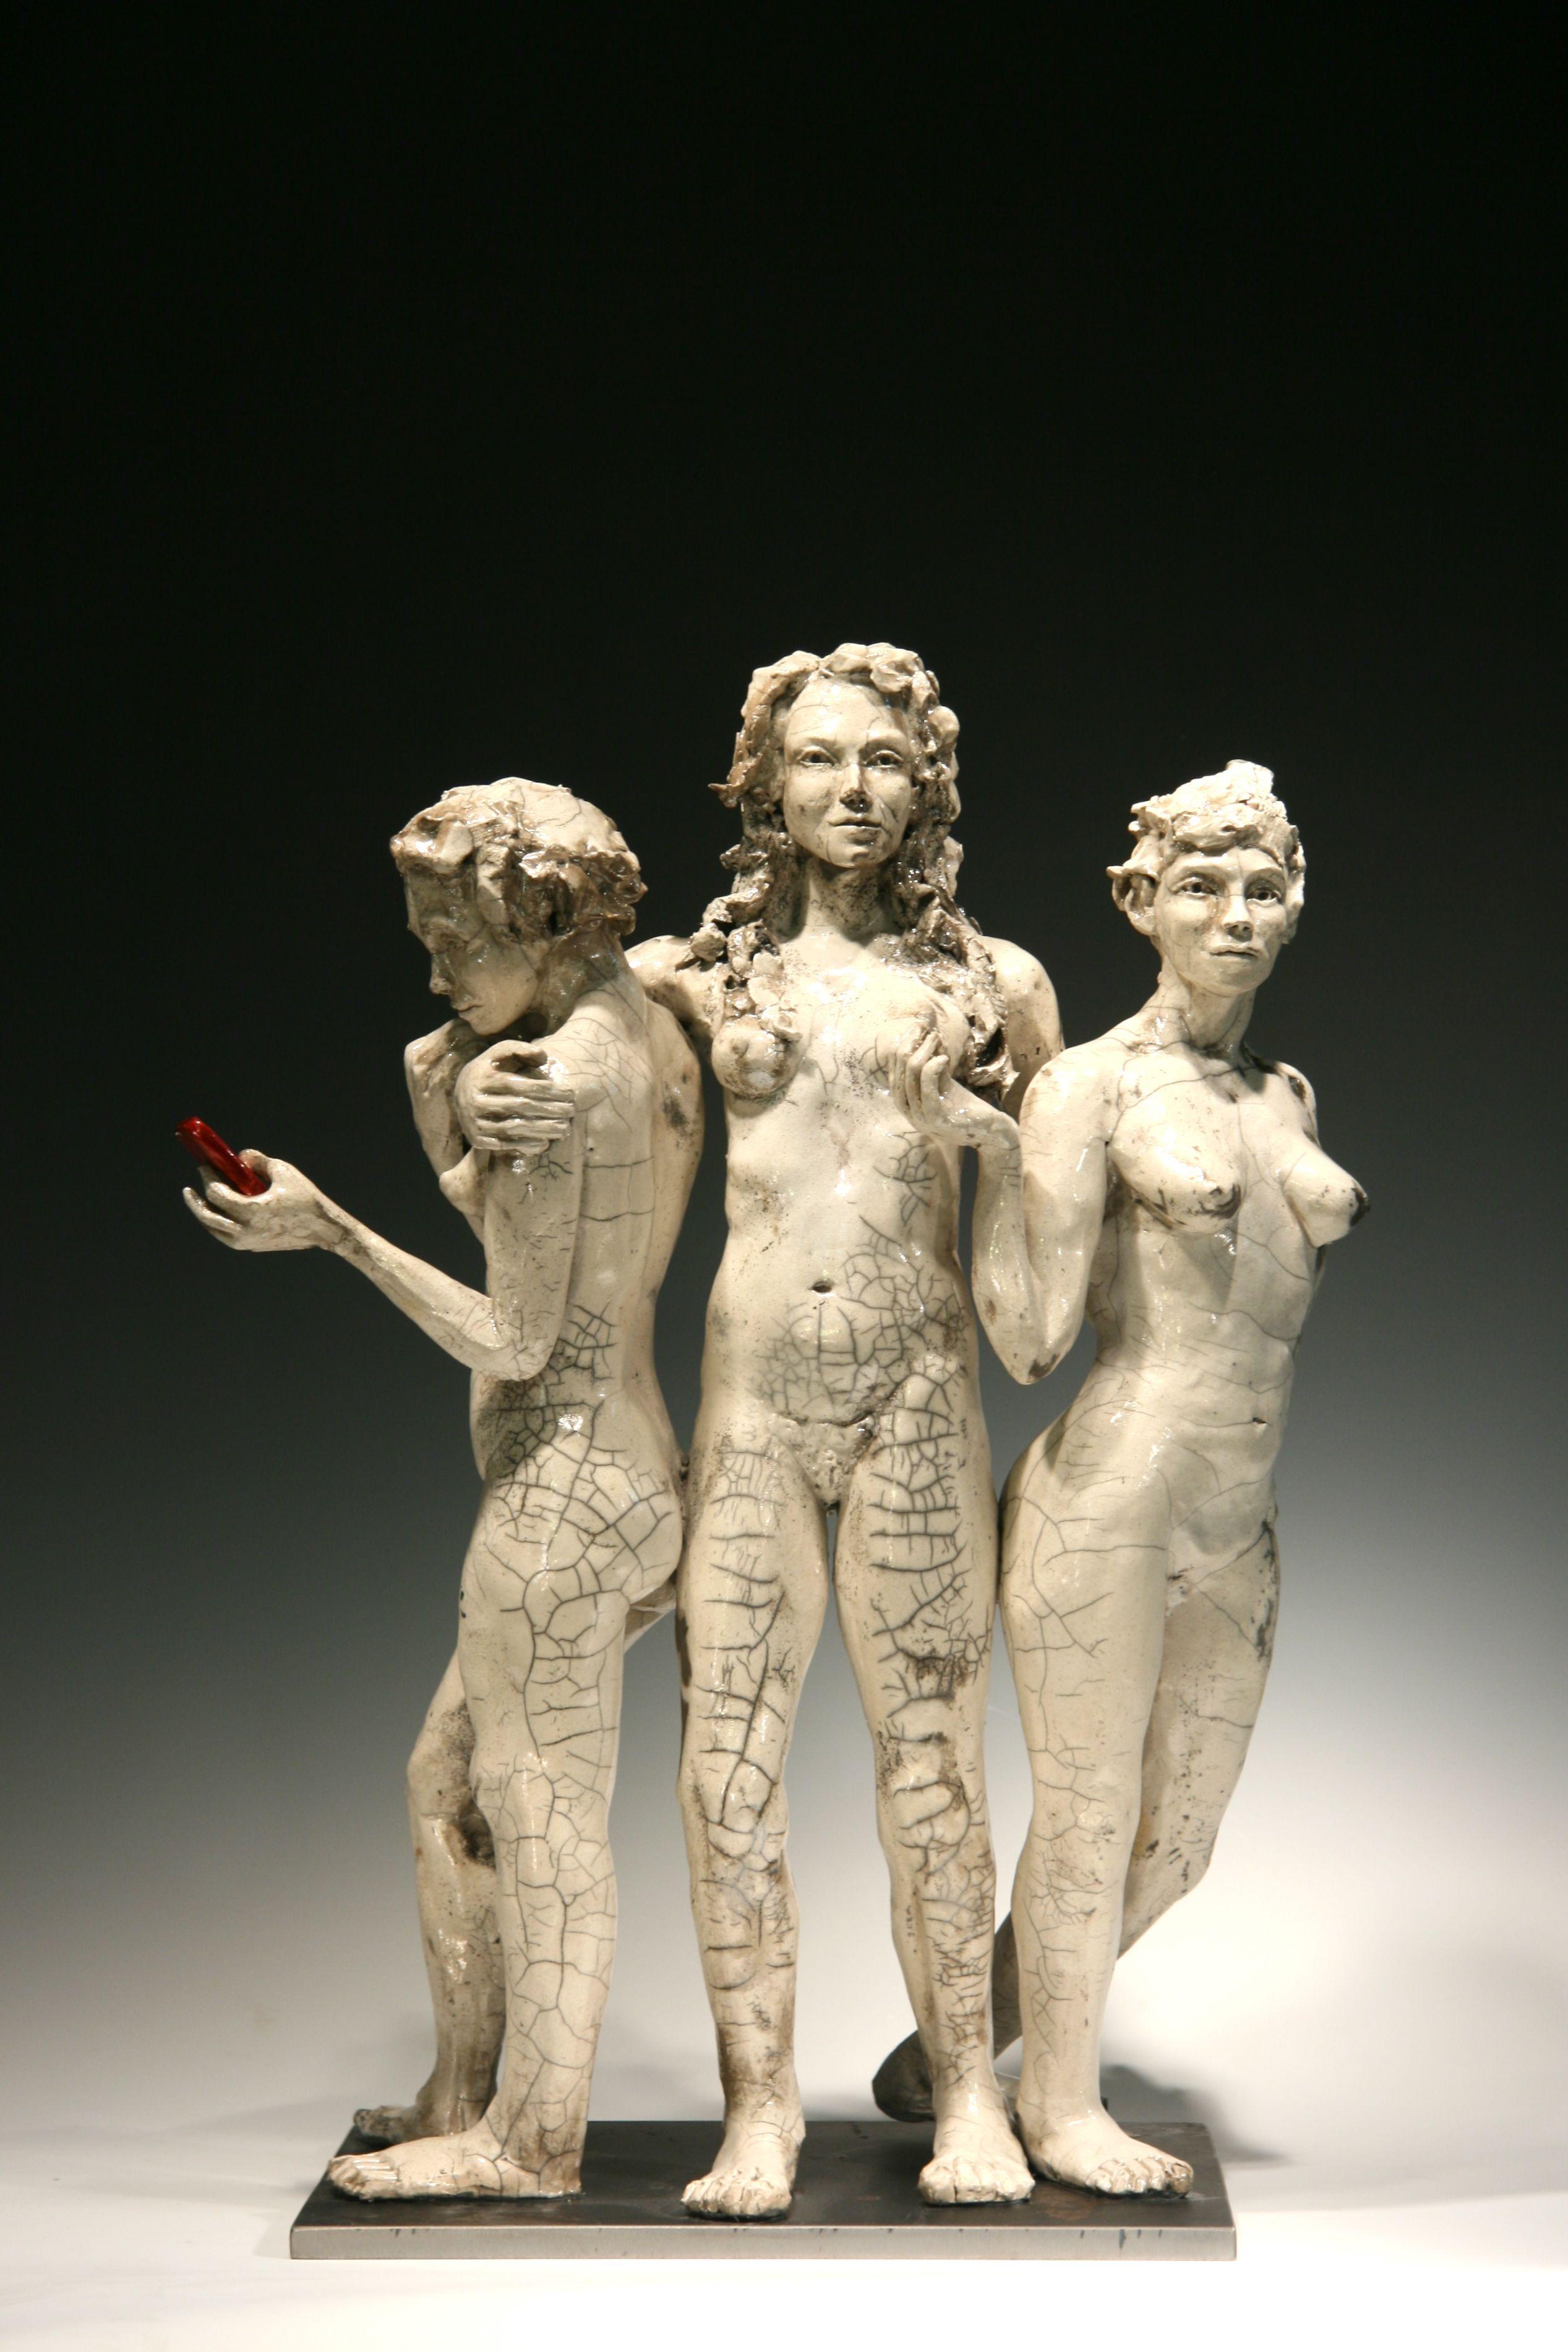 Three Graces with Smartphone - Contemporary Sculpture by Bob Clyatt